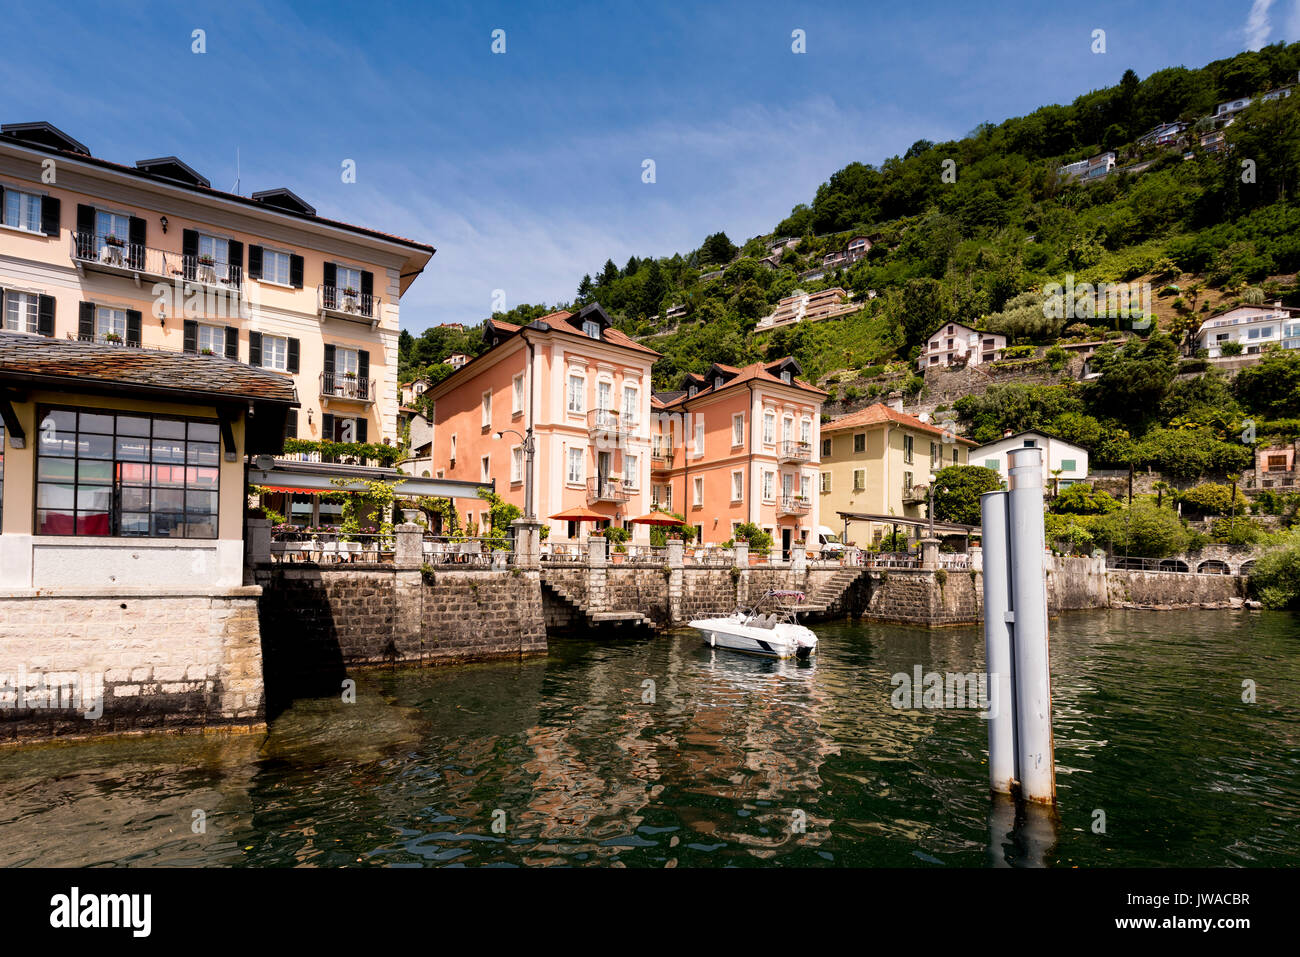 The pier and houses of Cannero Riviera - Cannero Riviera , Lake Maggiore, Lombardy, Italy, Europe Stock Photo